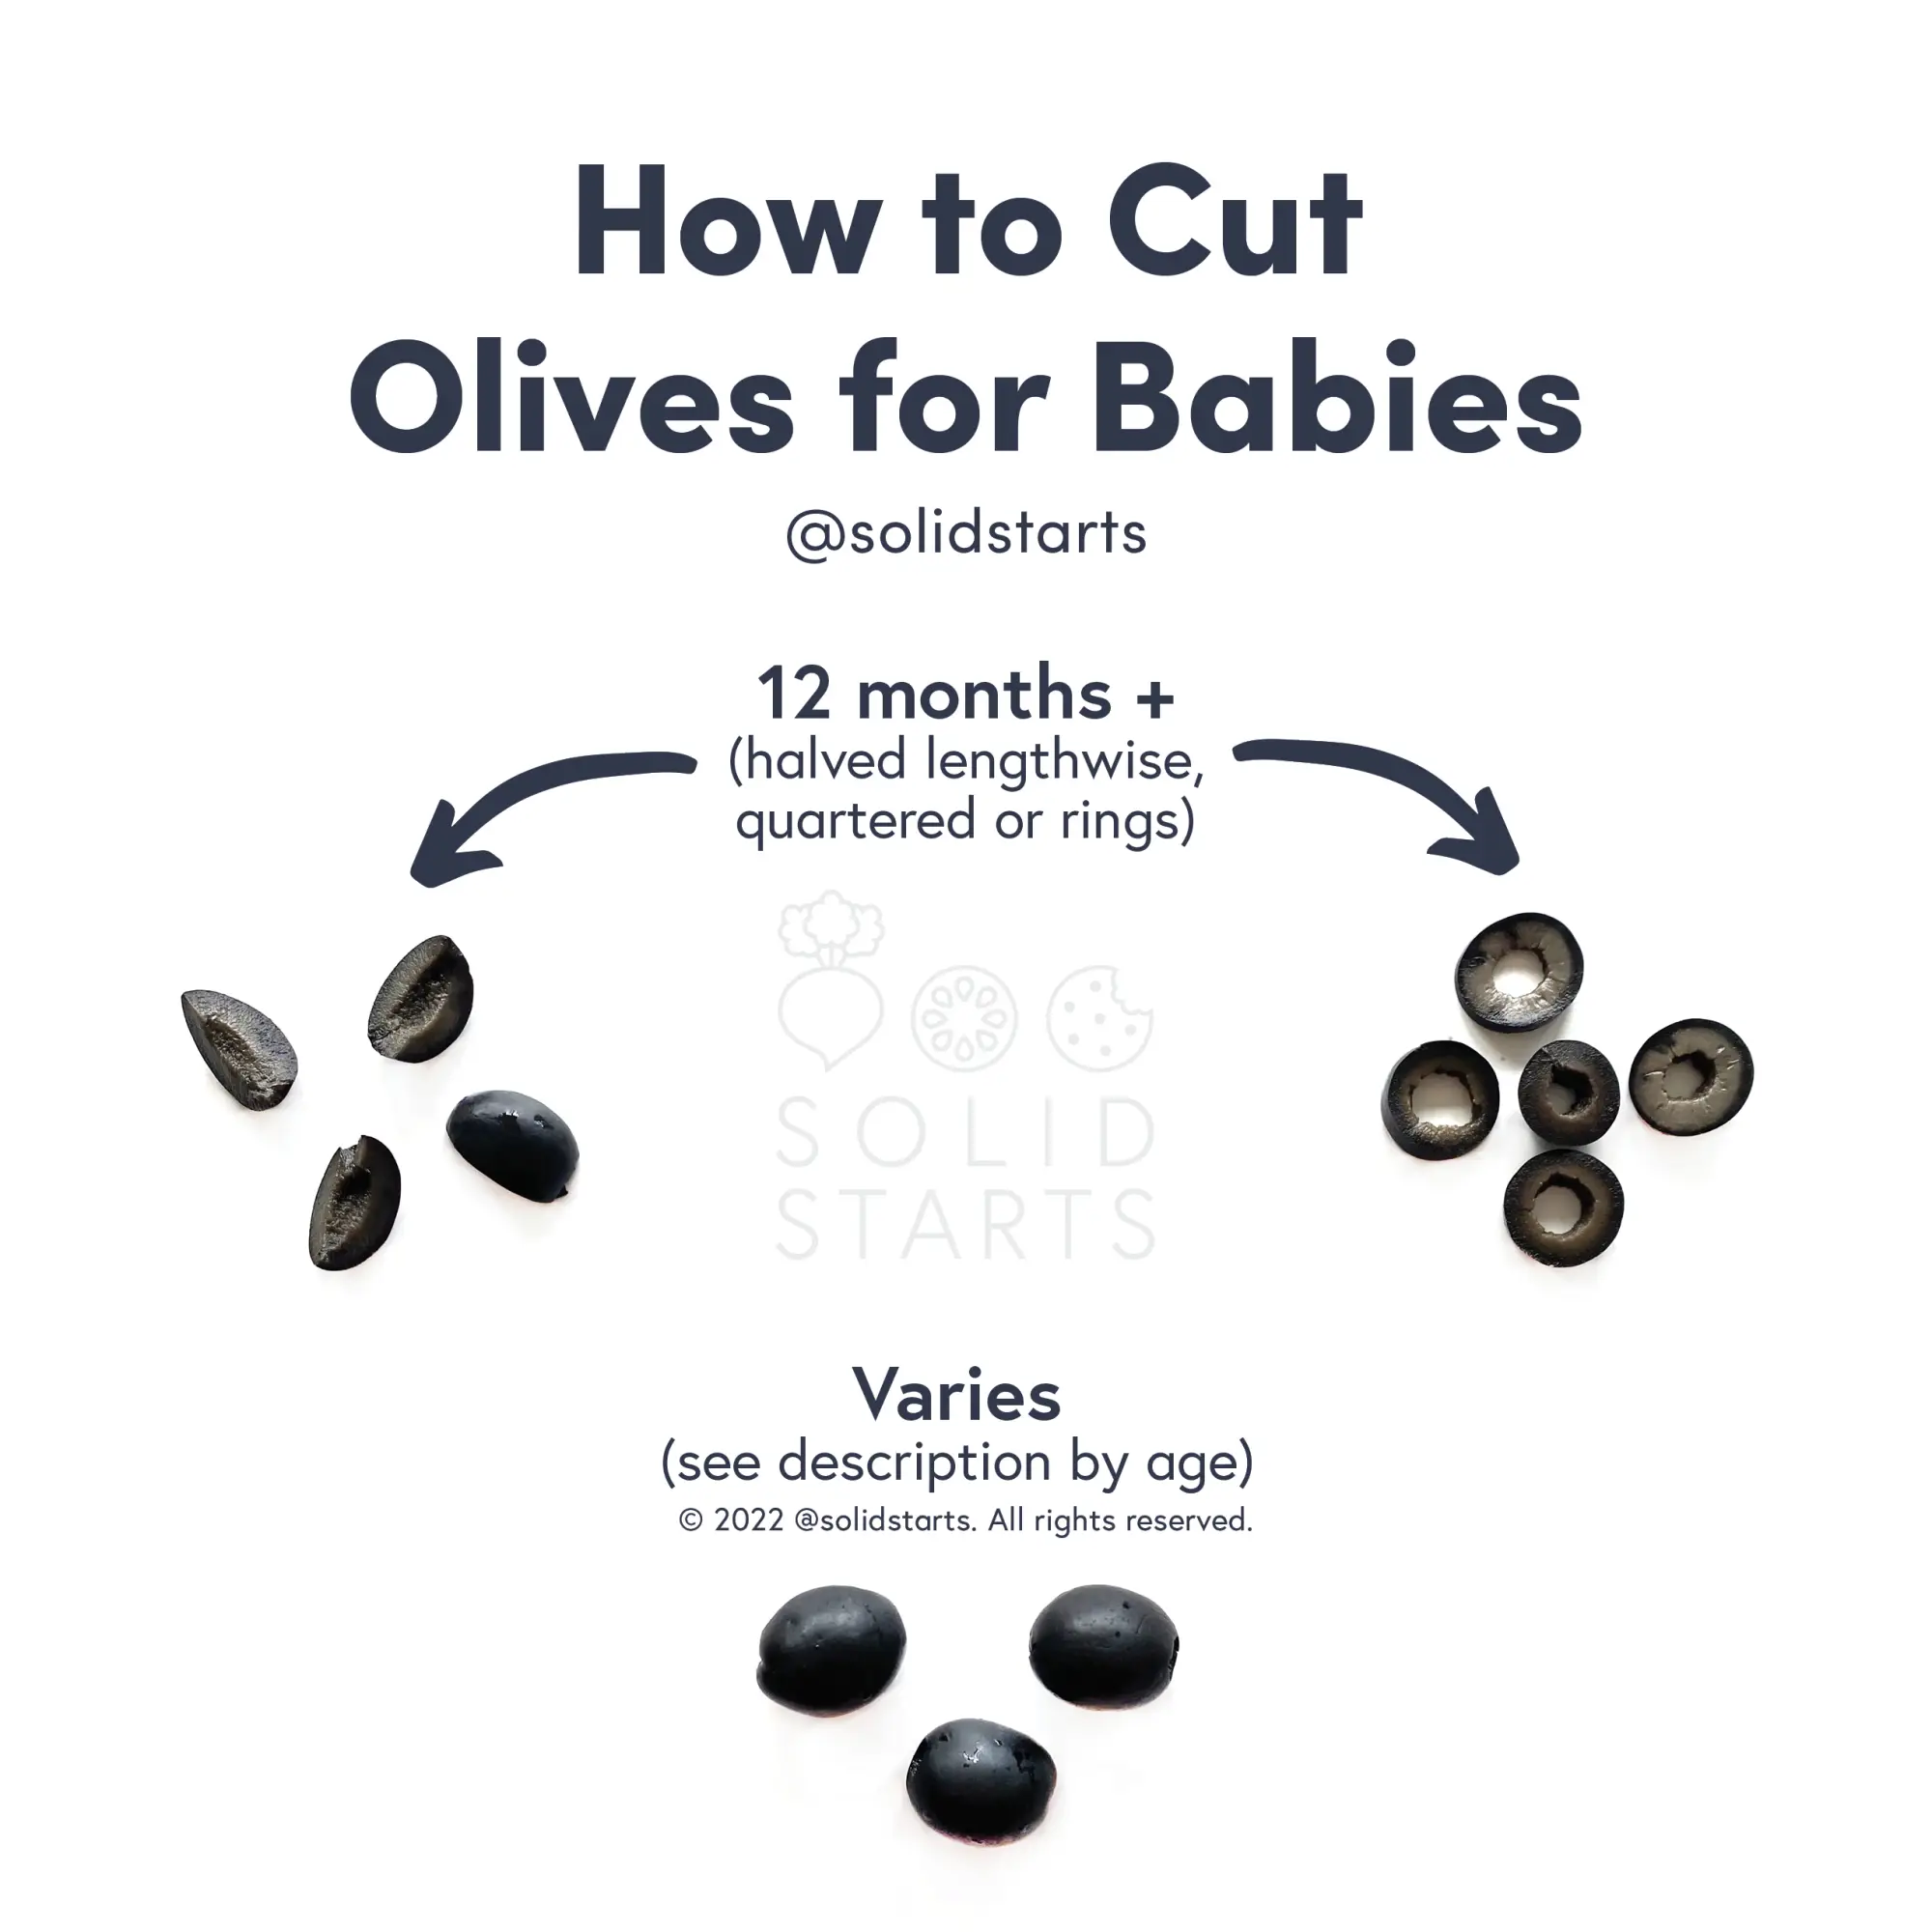 a Solid Starts infographic with the header How to Cut Olives for Babies: quartered or rings for 12 mos+ and Varies for whole pitted olives